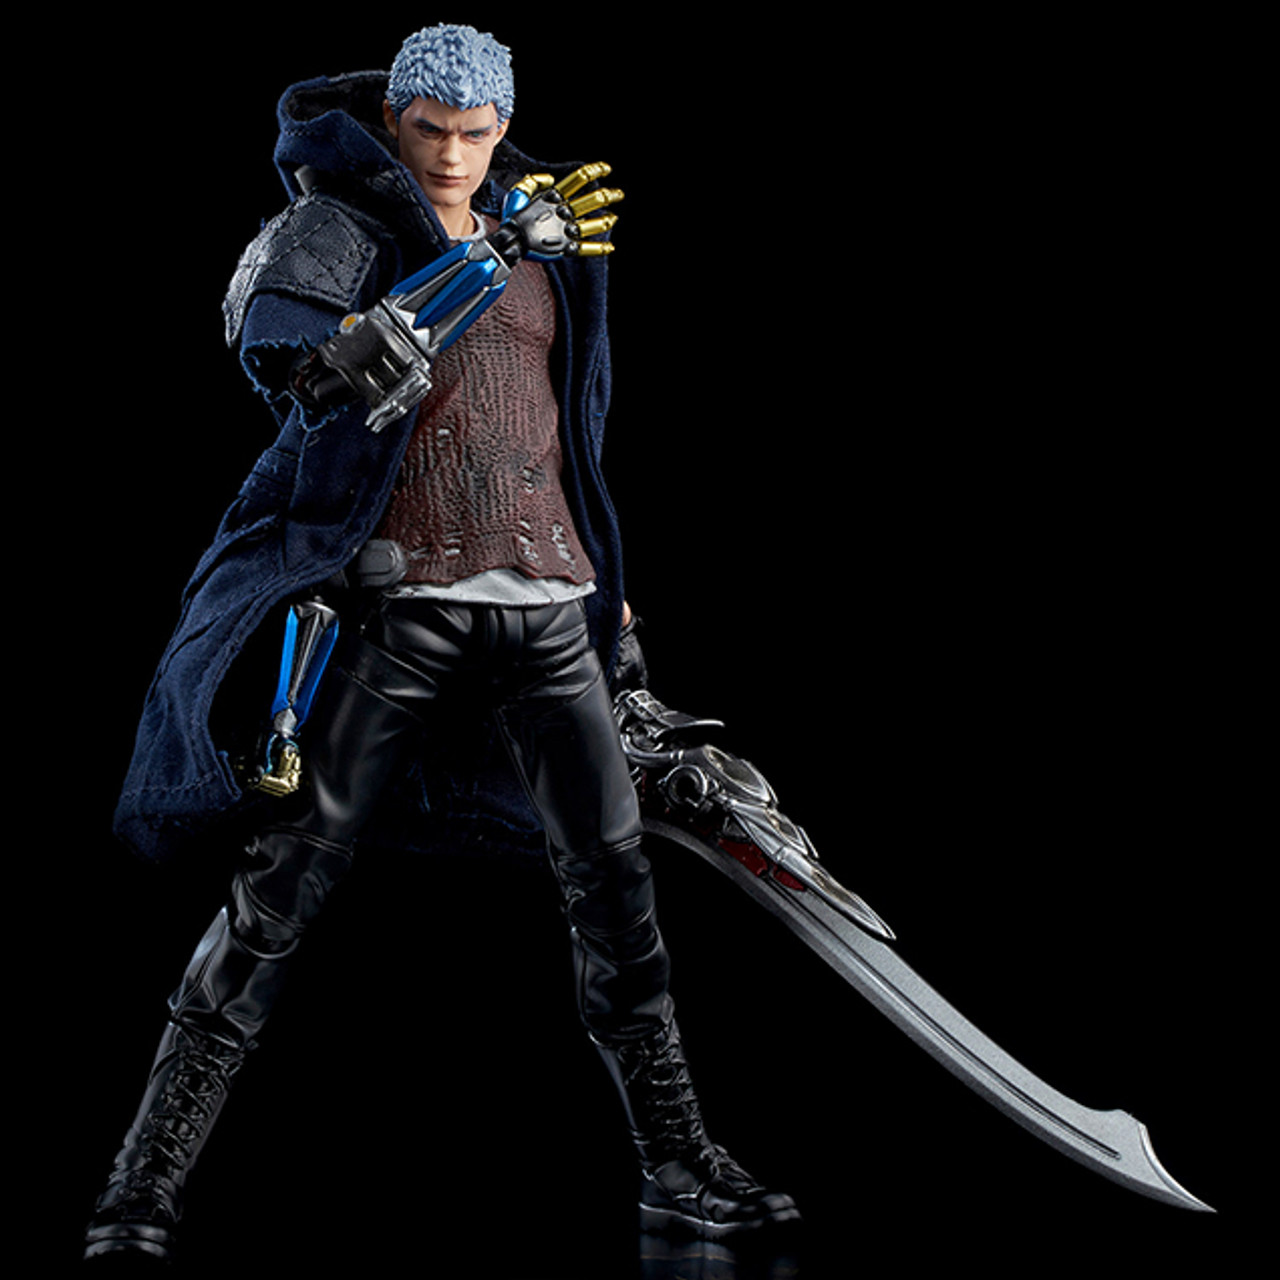 Nero Devil May Cry 5 1/12 Action Figure